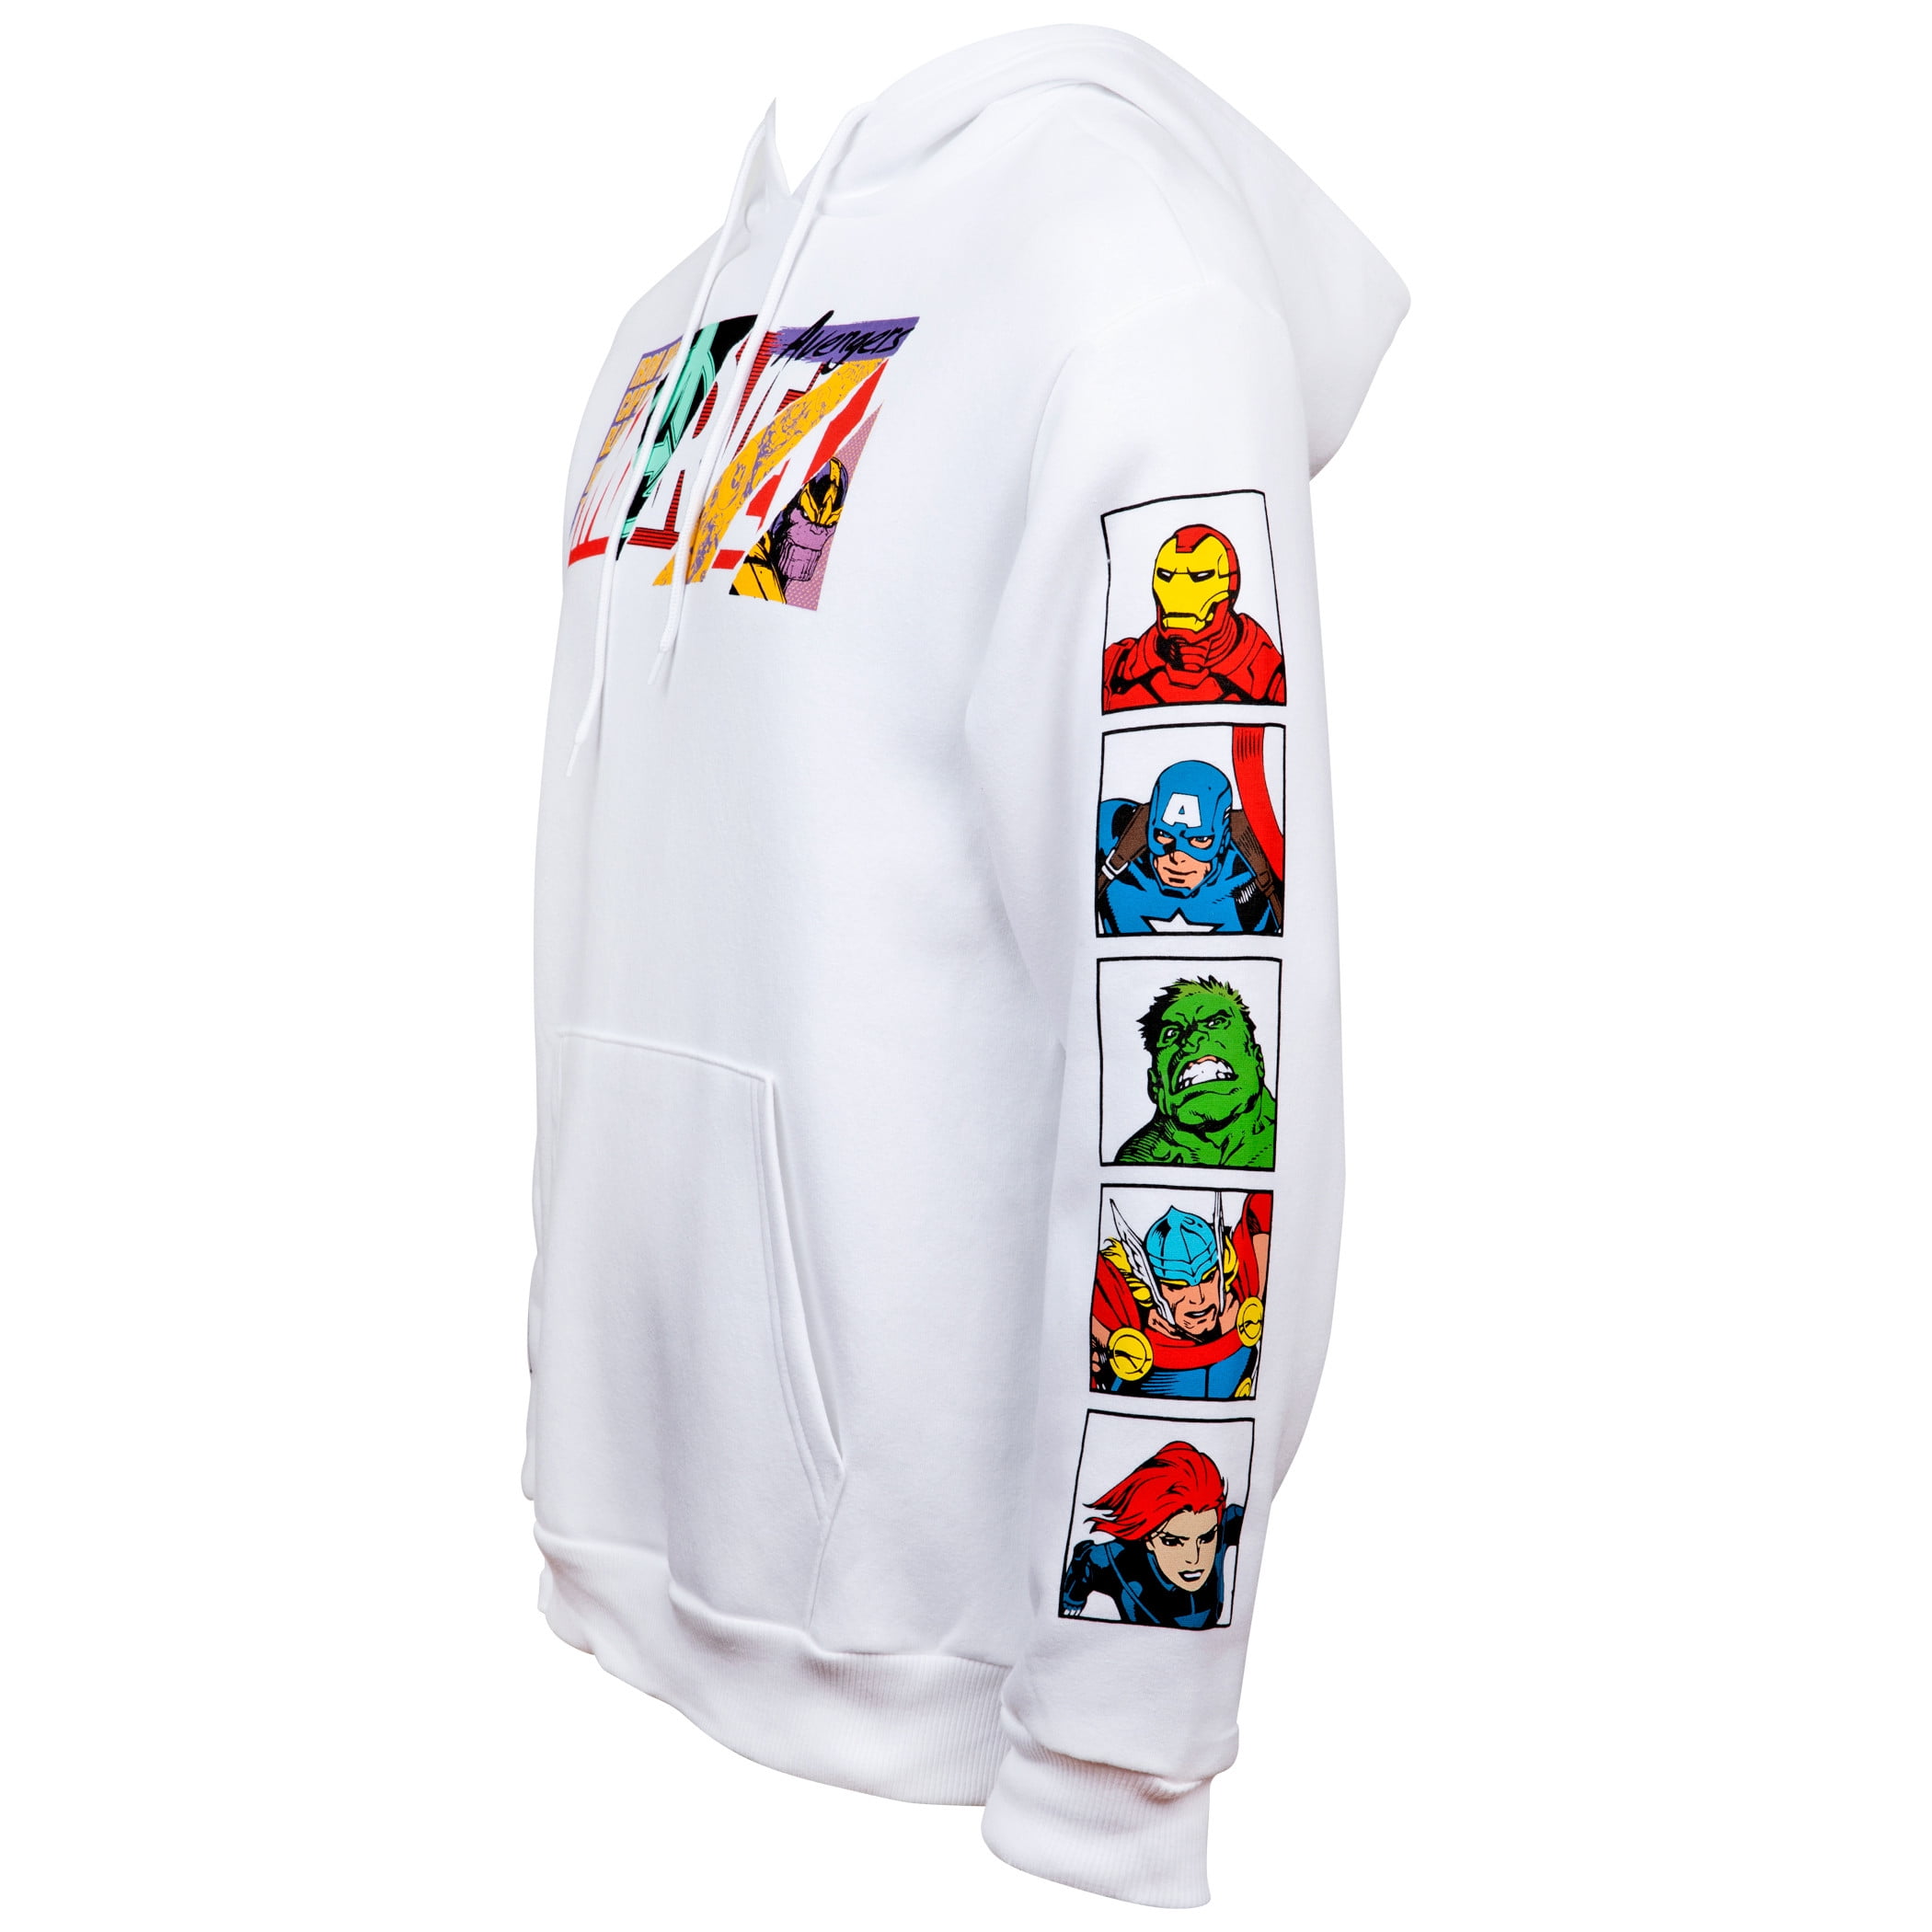 Brand Marvel Prints-Large Block Collage Character Text Sleeve With Hoodie